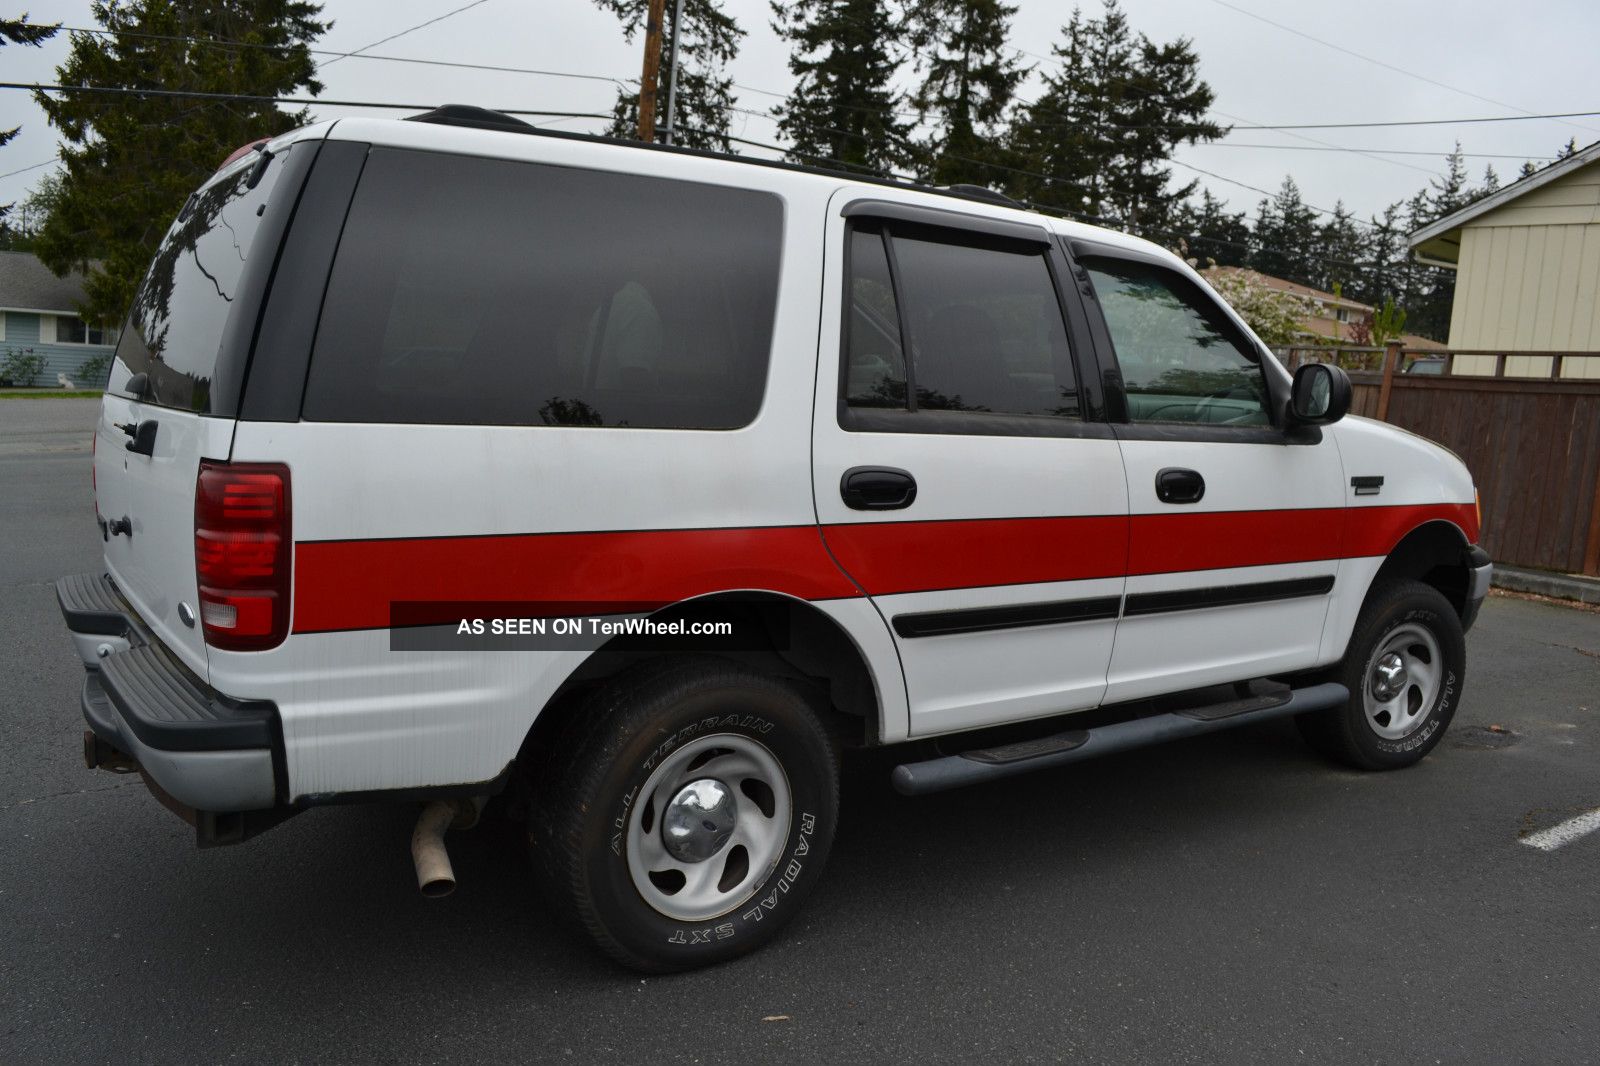 2001 Ford expedition wheelbase #4